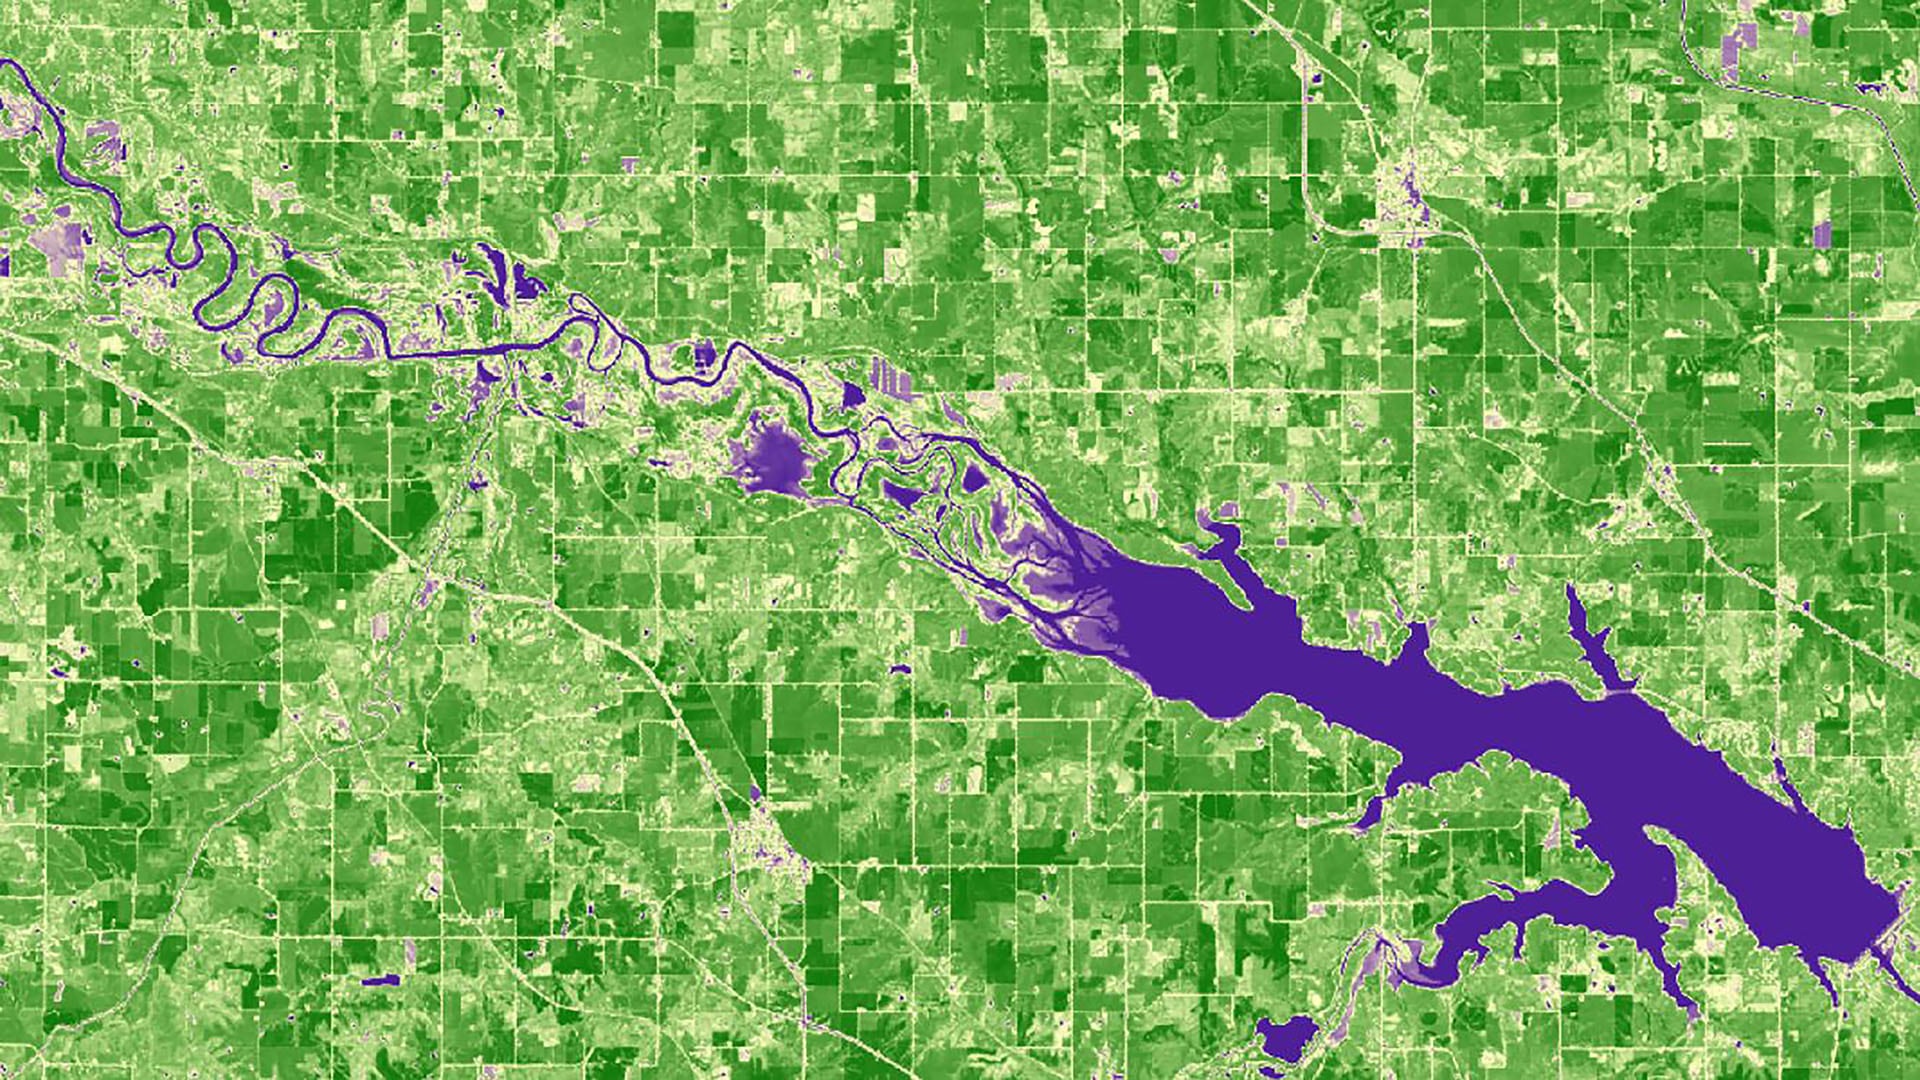 Displayed is a processed NDVI (Normalized Difference Vegetation Index) image using 2019 Landsat 8 Operational Land Imager red and near infrared bands. The Image shows agricultural zones in Polk County, Iowa. Darker green shades indicate dense healthy vegetation whereas lighter green shades indicate less dense or moderately healthy vegetation. Purple shades indicate water, and wetlands. NDVI values can be used as a proxy of a crop’s performance and help farmers monitor their crops' progress.Keywords: Olivia Landry (Project Lead), Liam Bhajan, Otto Castillo Altun, Owen Smith, NDVI, Landsat 8 OLI